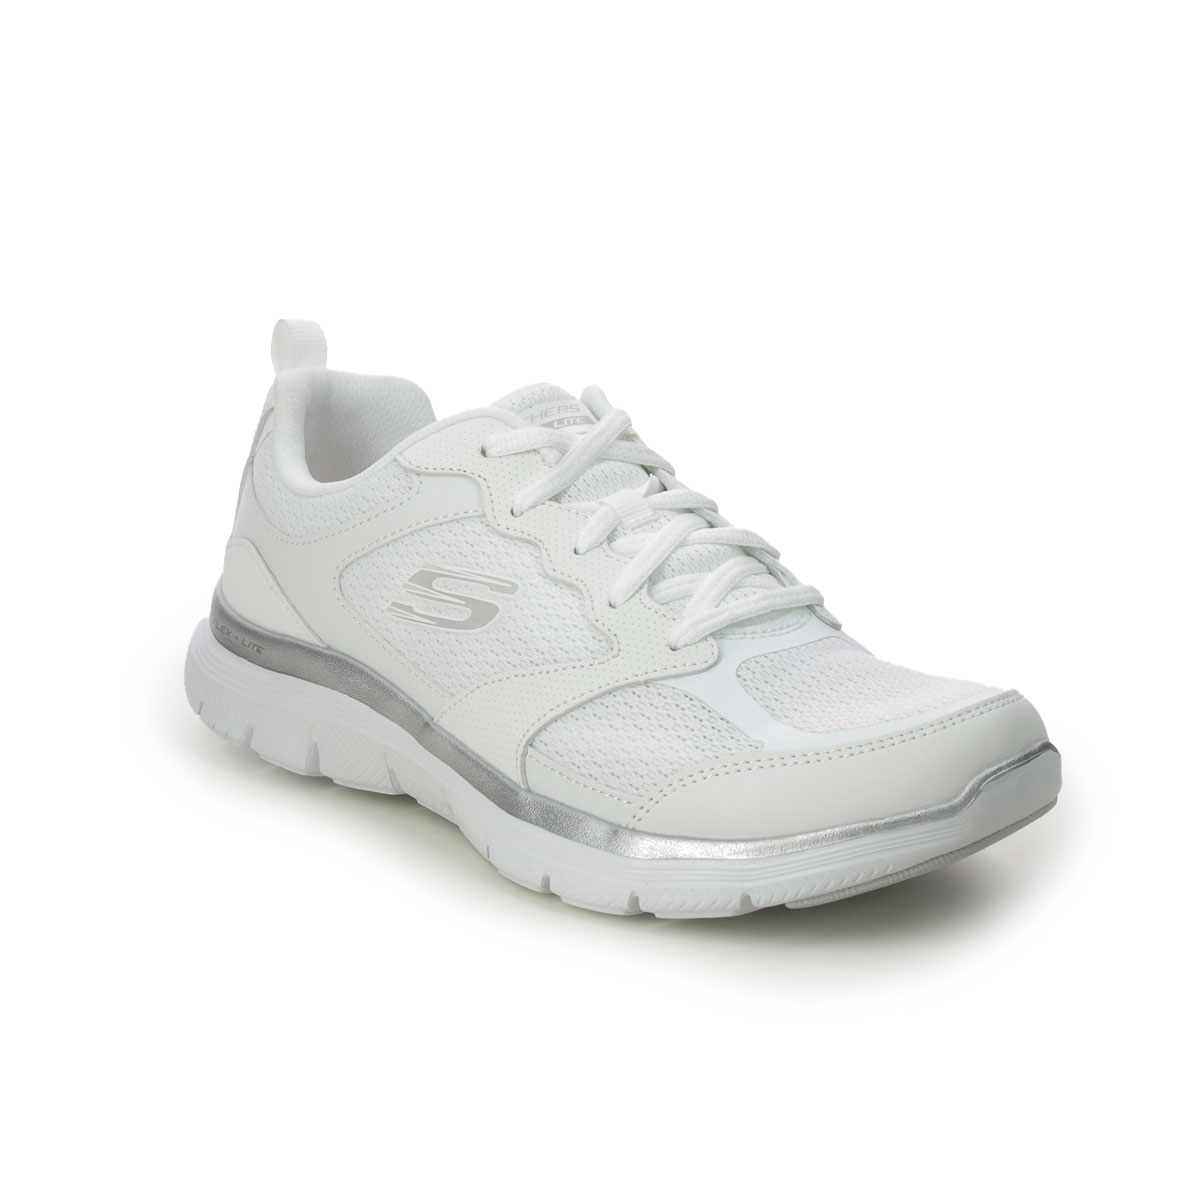 Skechers Flex Appeal 4.0 WHT White Womens trainers 149305 in a Plain Man-made in Size 8